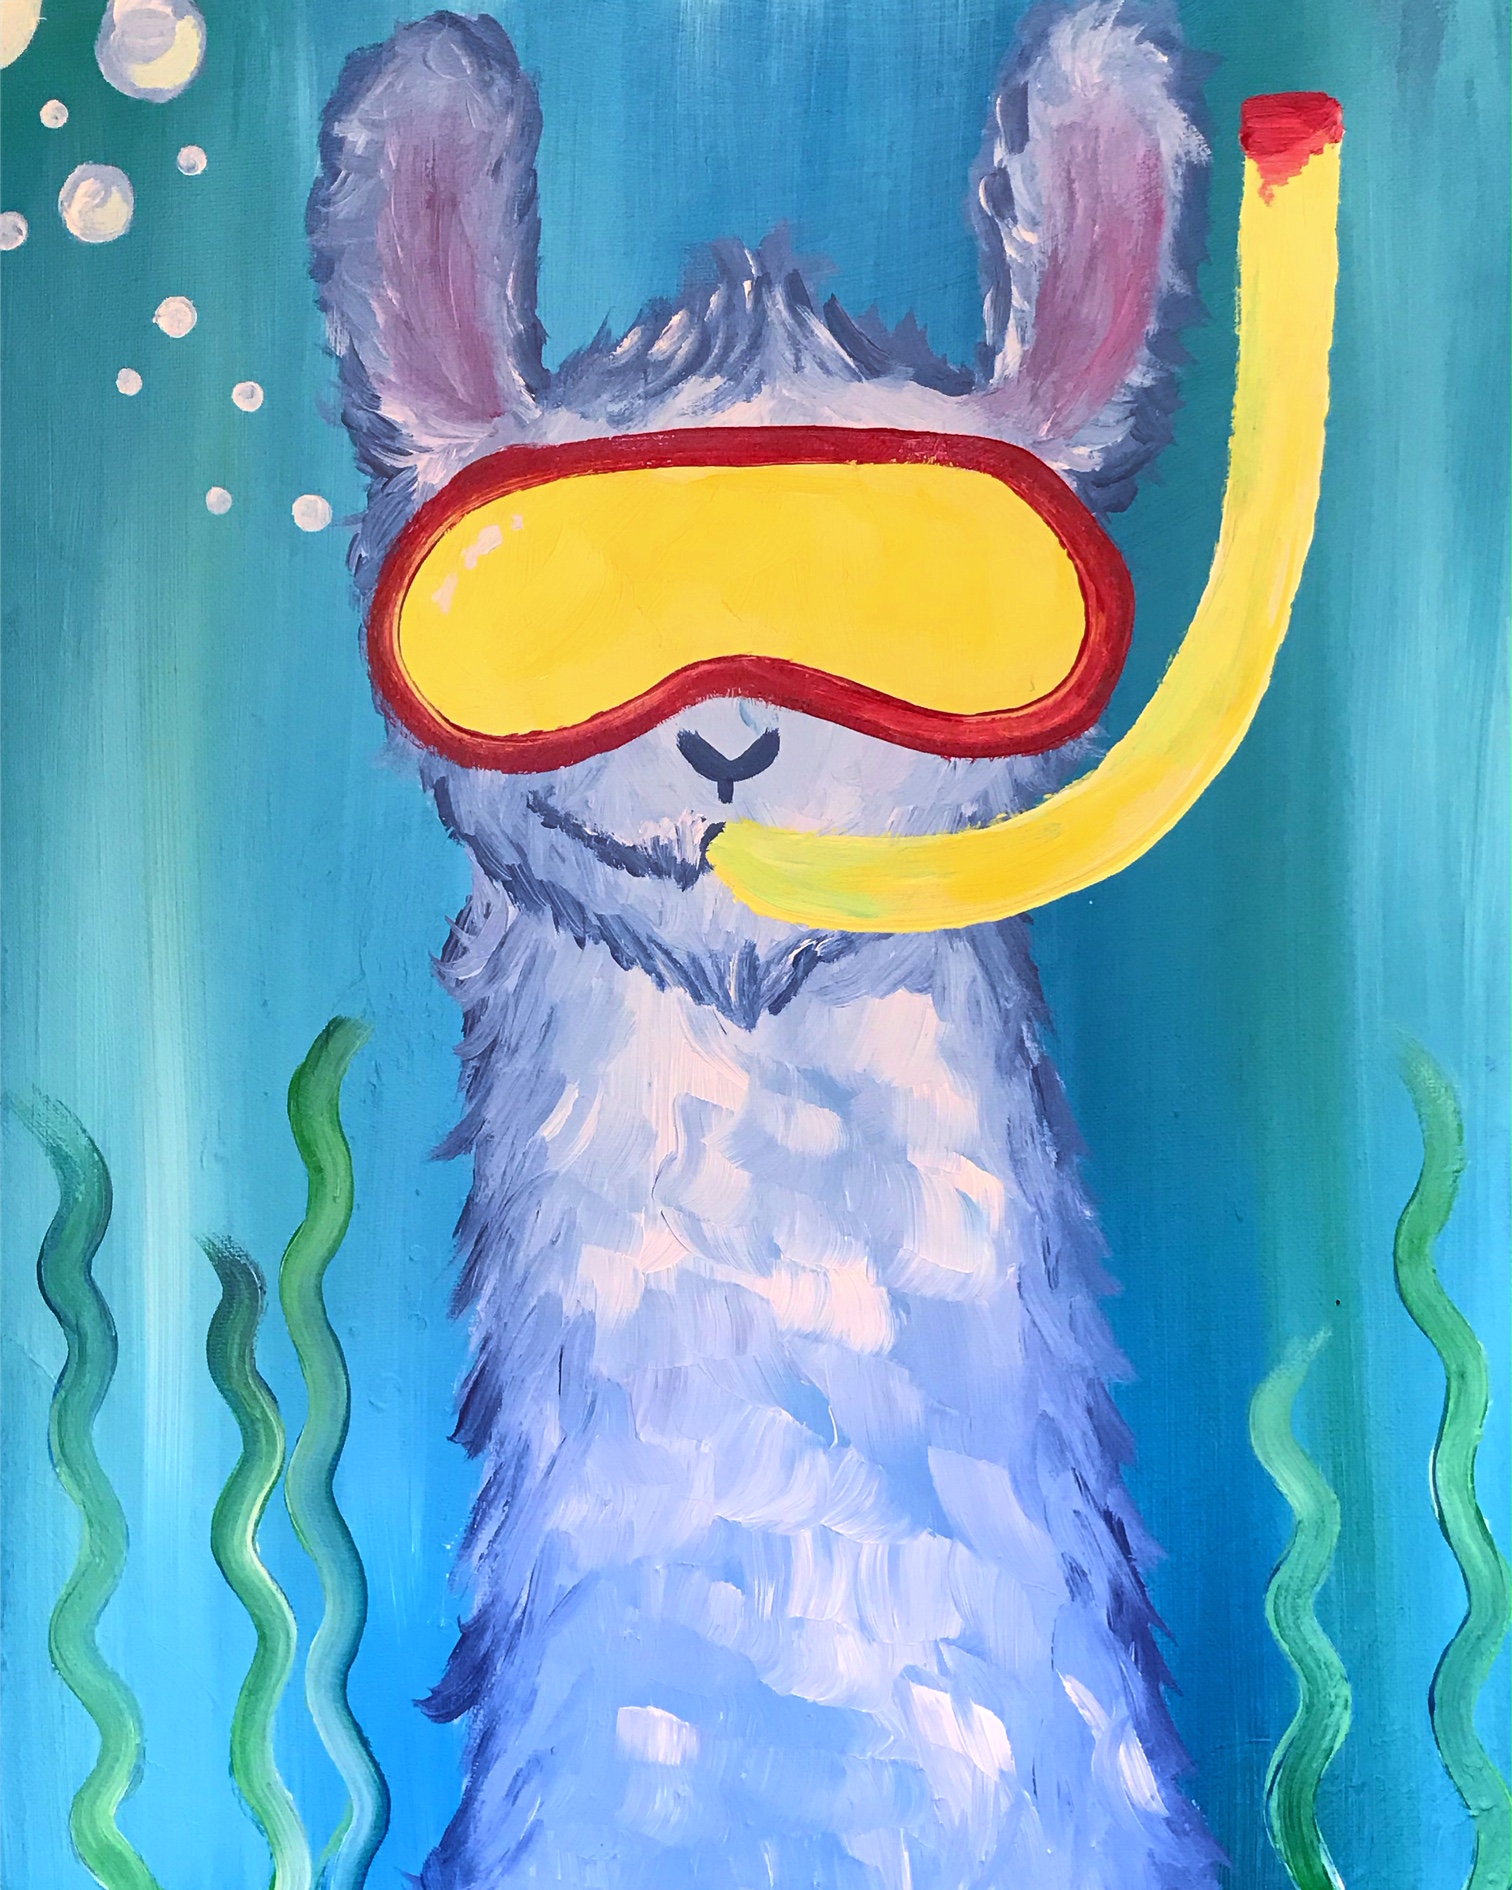 A Under The Sea Llama experience project by Yaymaker